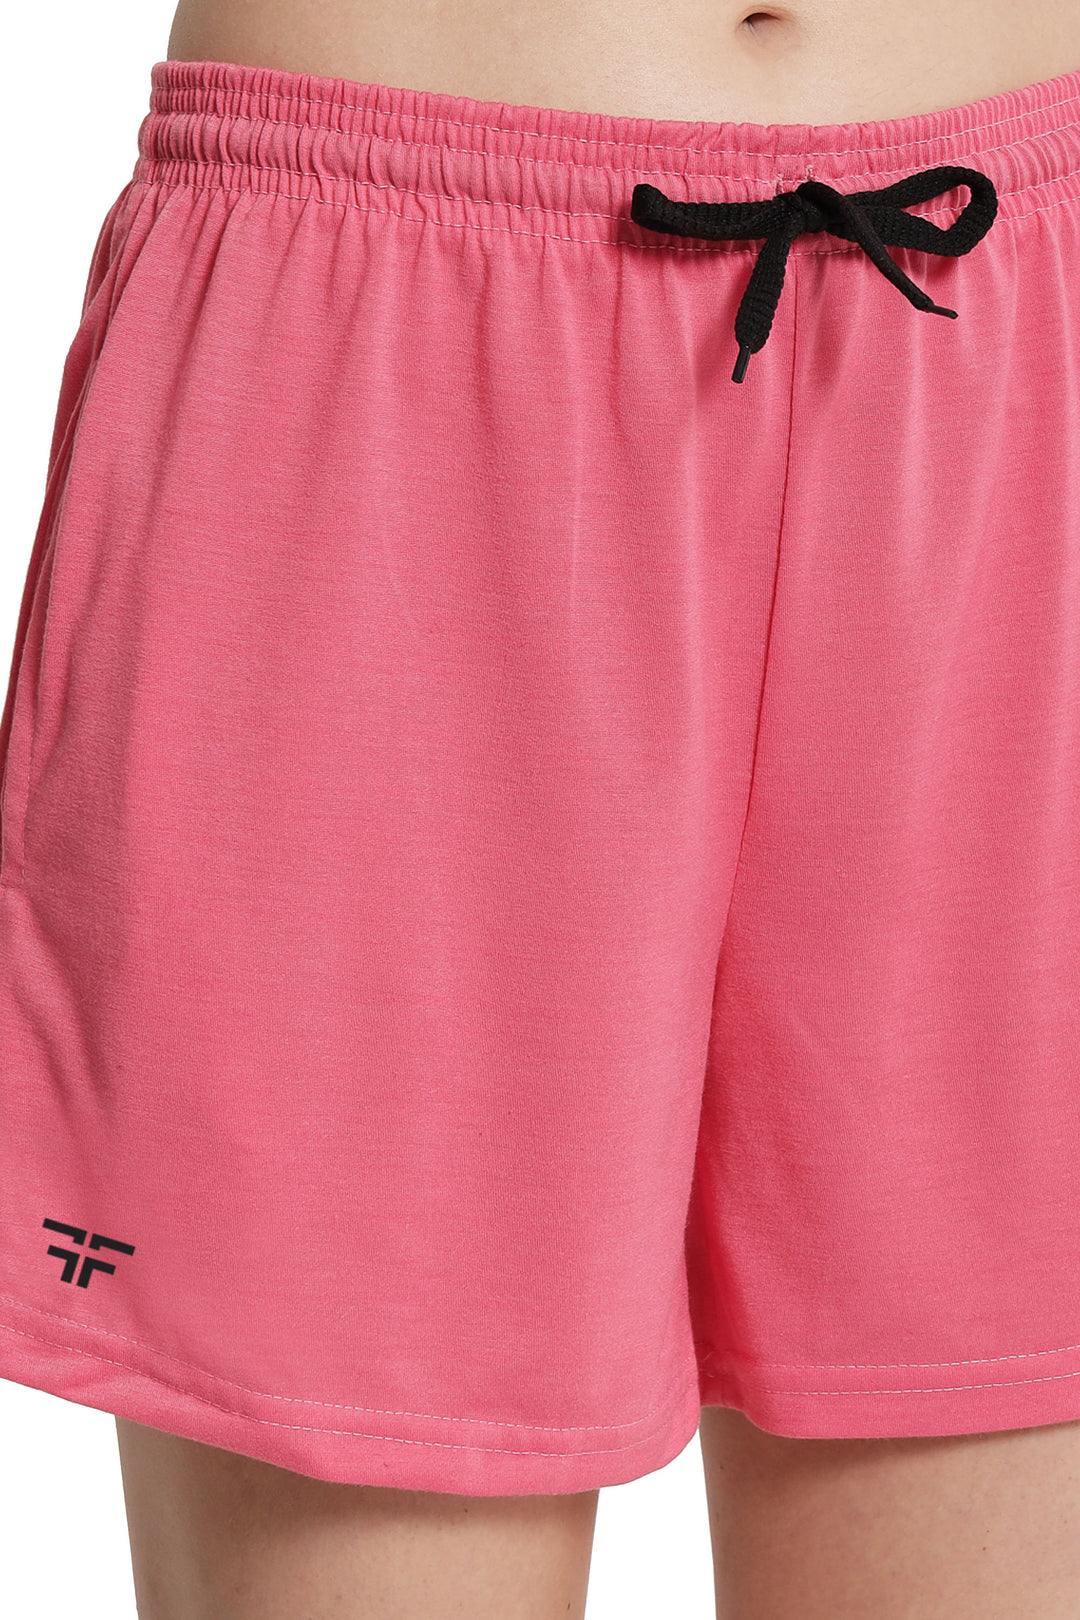 Pink Color Solid Shorts